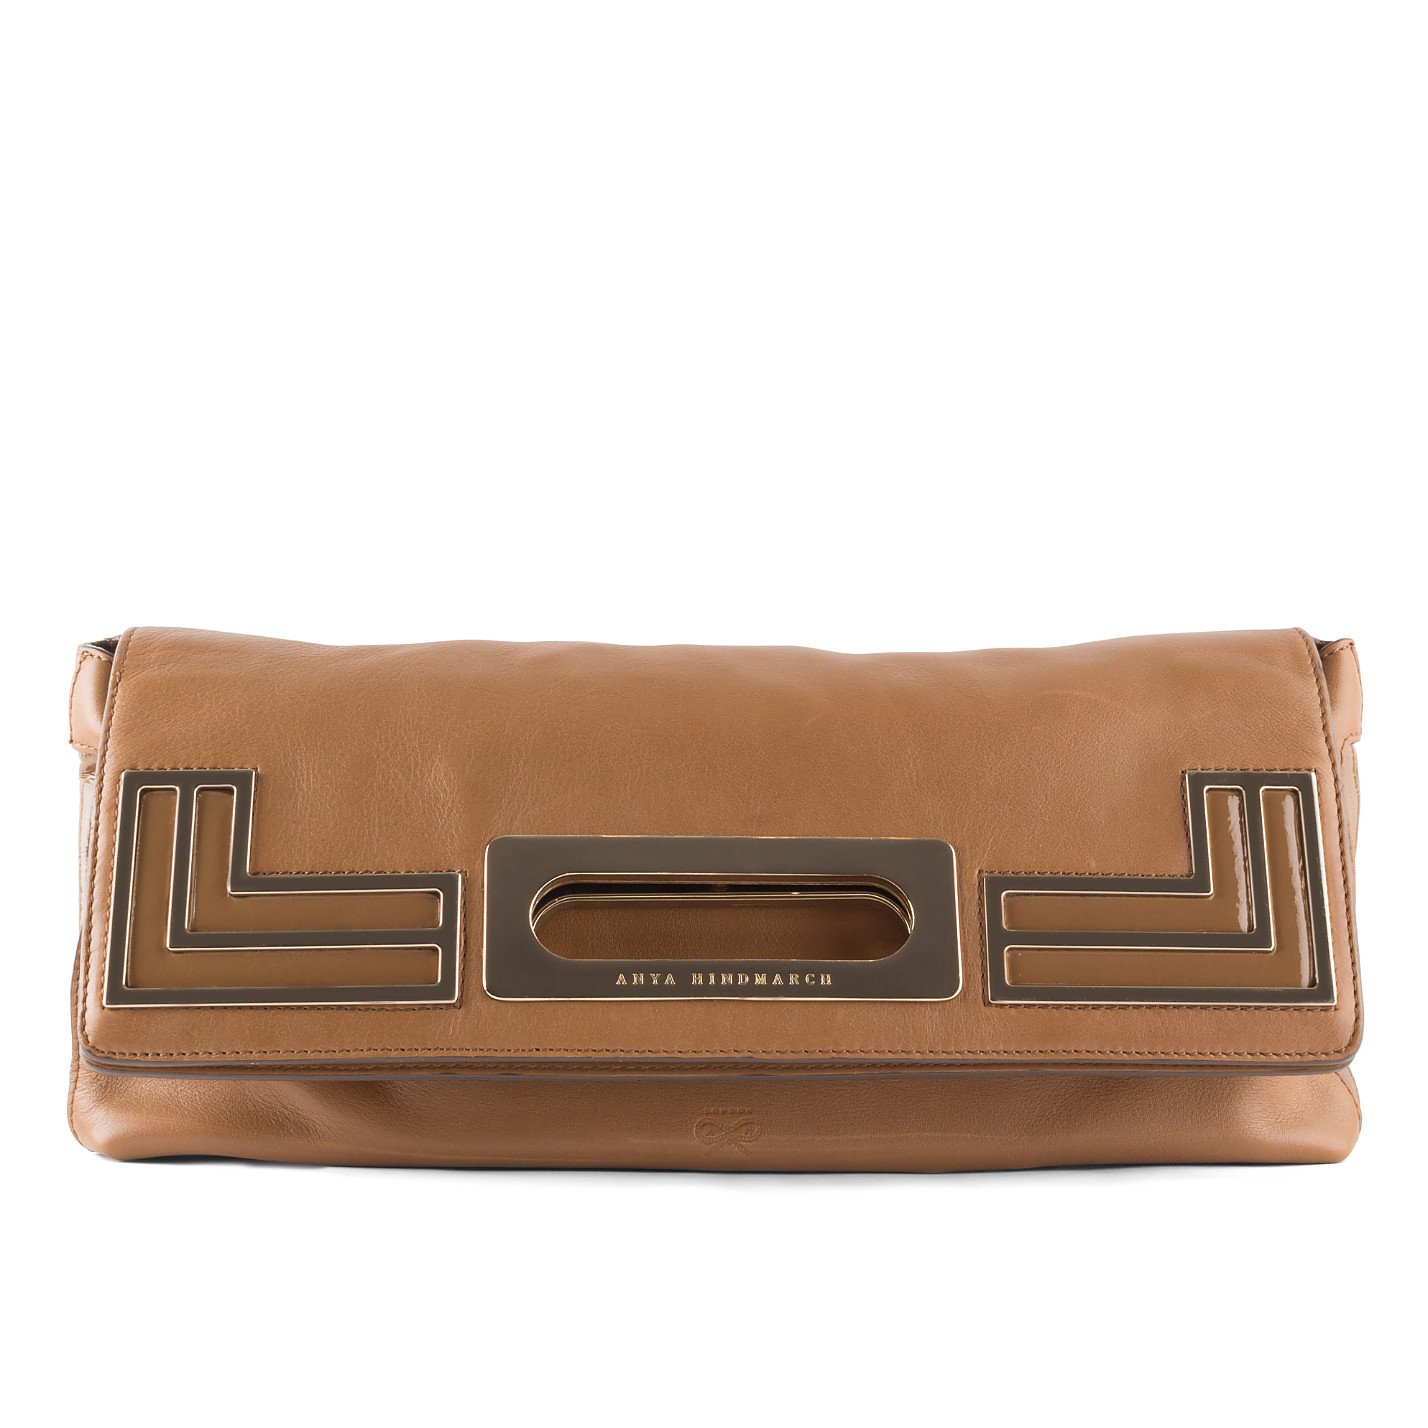 Anya Hindmarch Foldover Leather Clutch